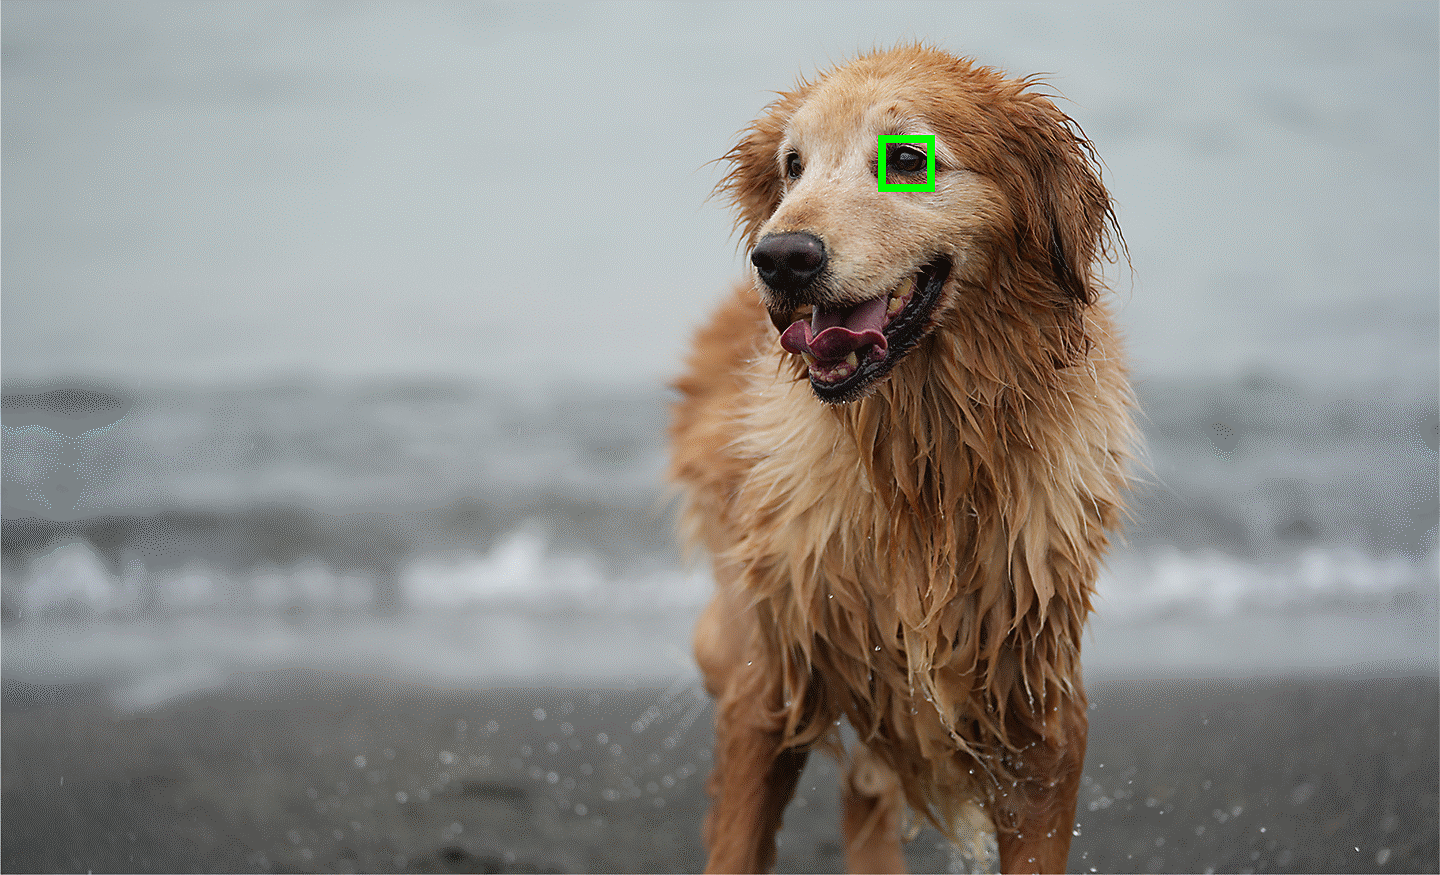 A photo illustrating the use of Real-time Eye AF for animals, with focus on the subject dog's eye